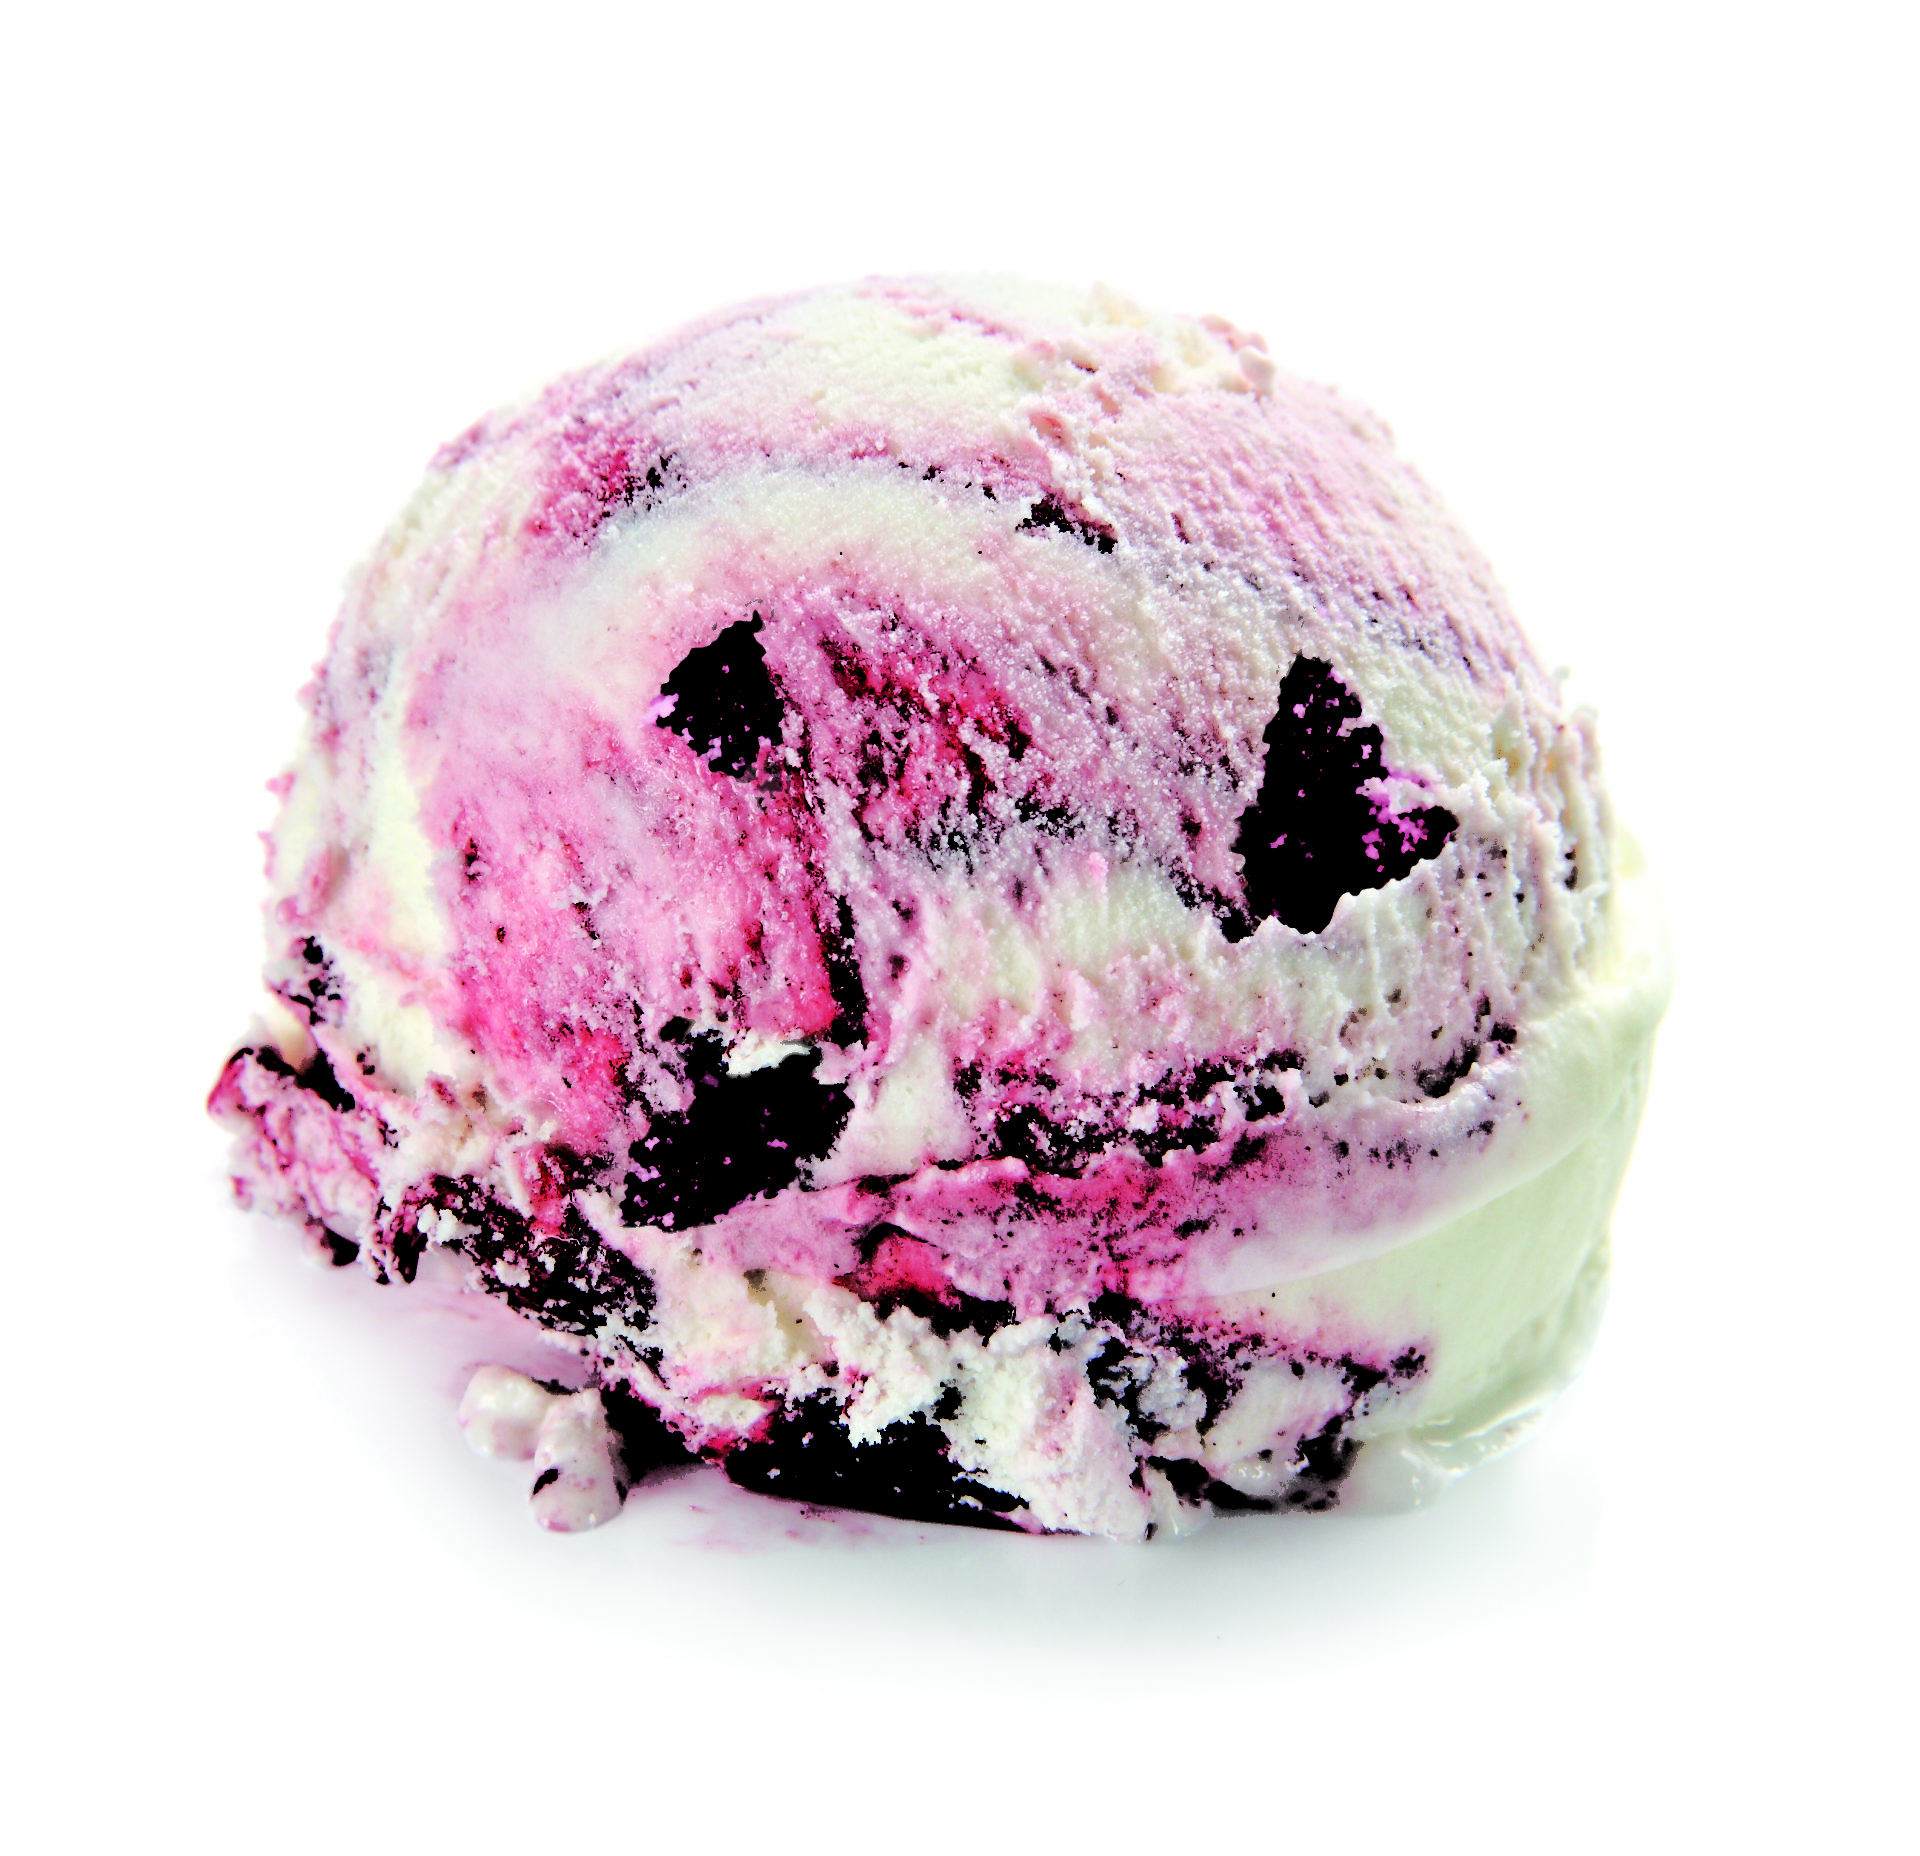 A scoop of ice cream on a white background in an industrial catalog.